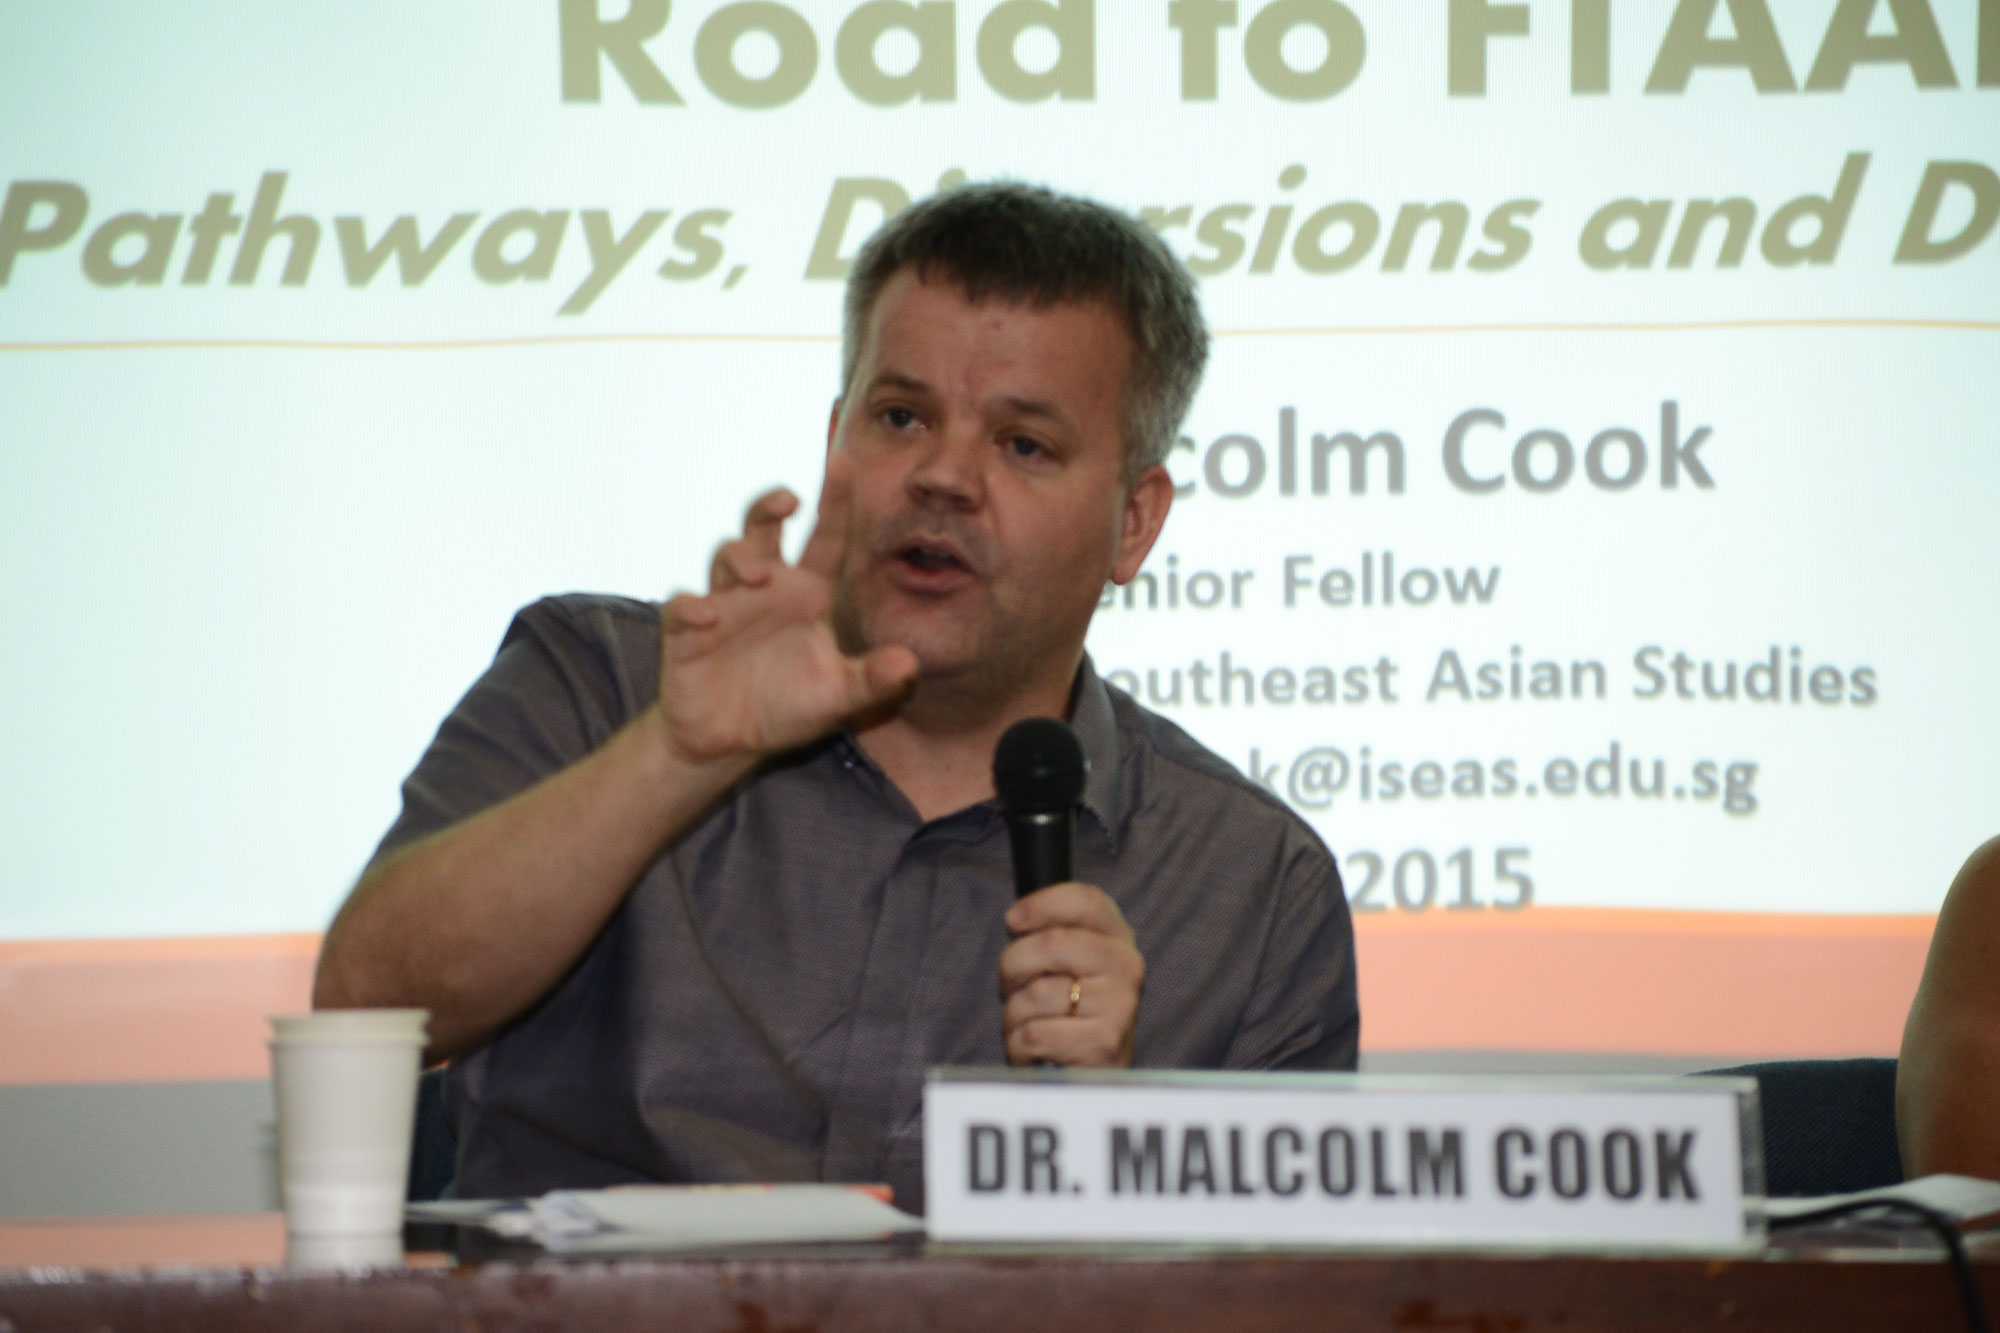 Pulong Saliksikan On Road To FTAAP: Pathways, Diversions And Dead-Ends-DSC_3960.jpg